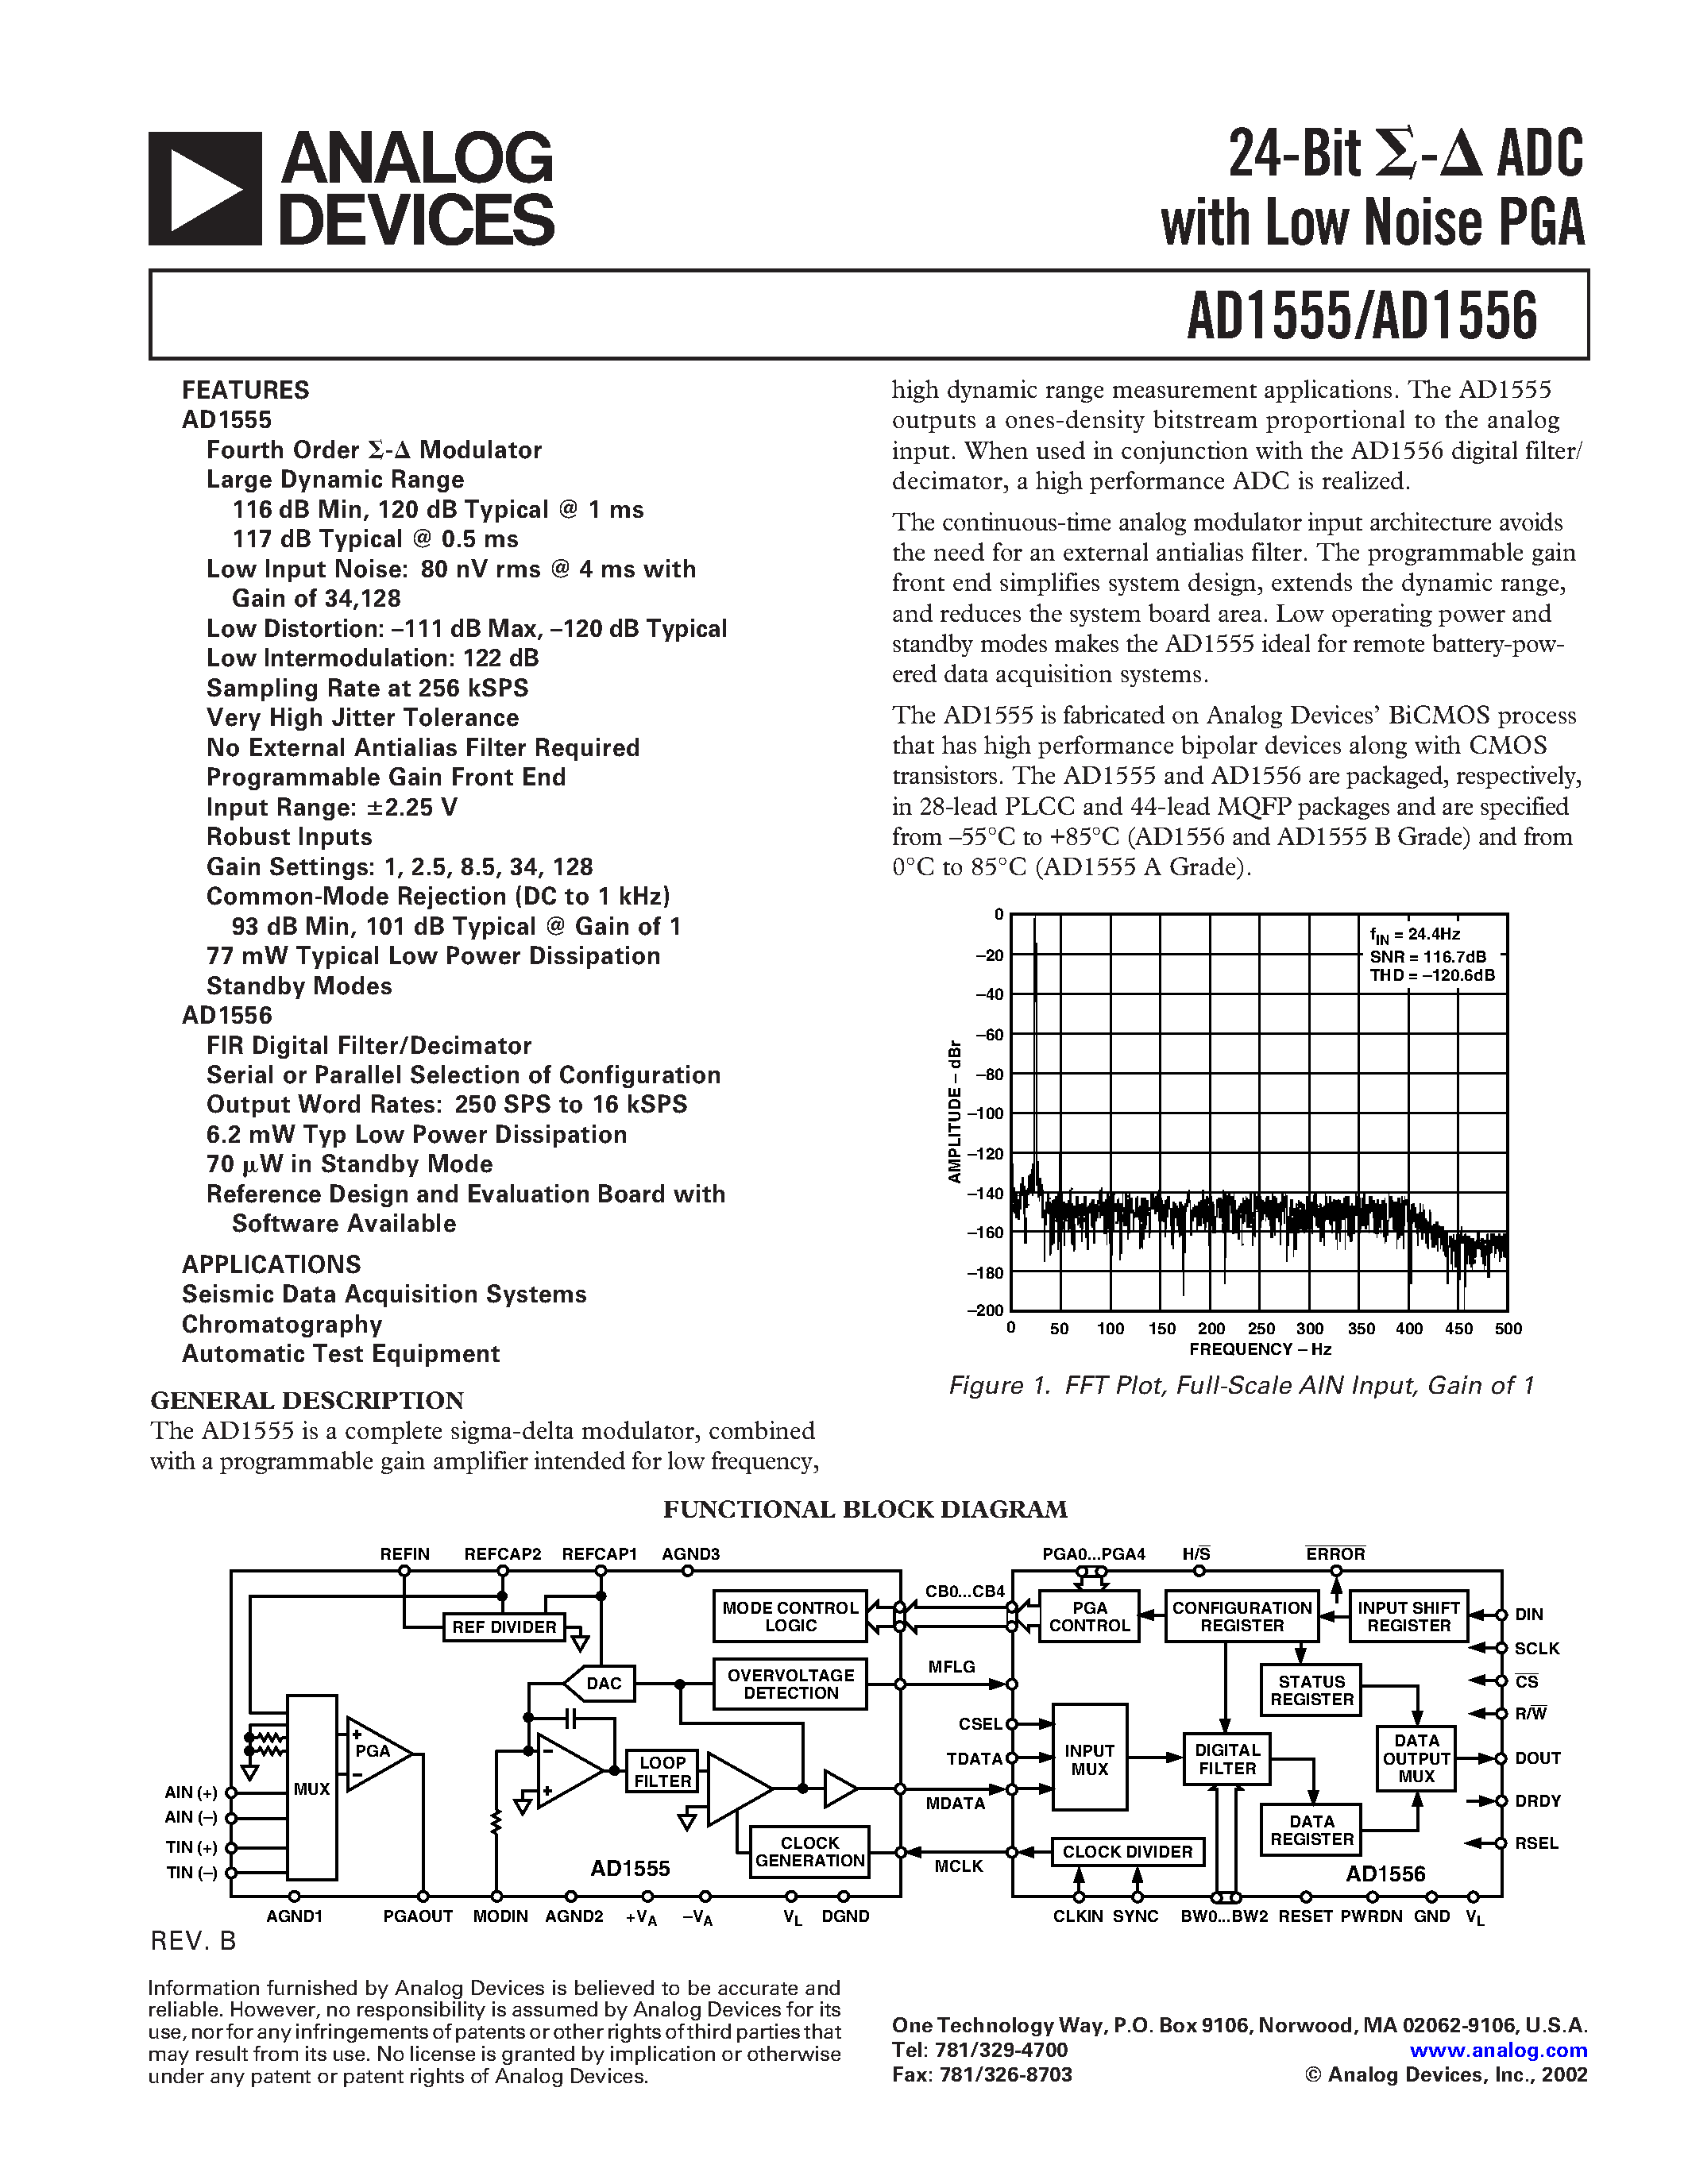 Datasheet AD1556ASRL - 24-Bit ADC WITH LOW NOISE PGA page 1